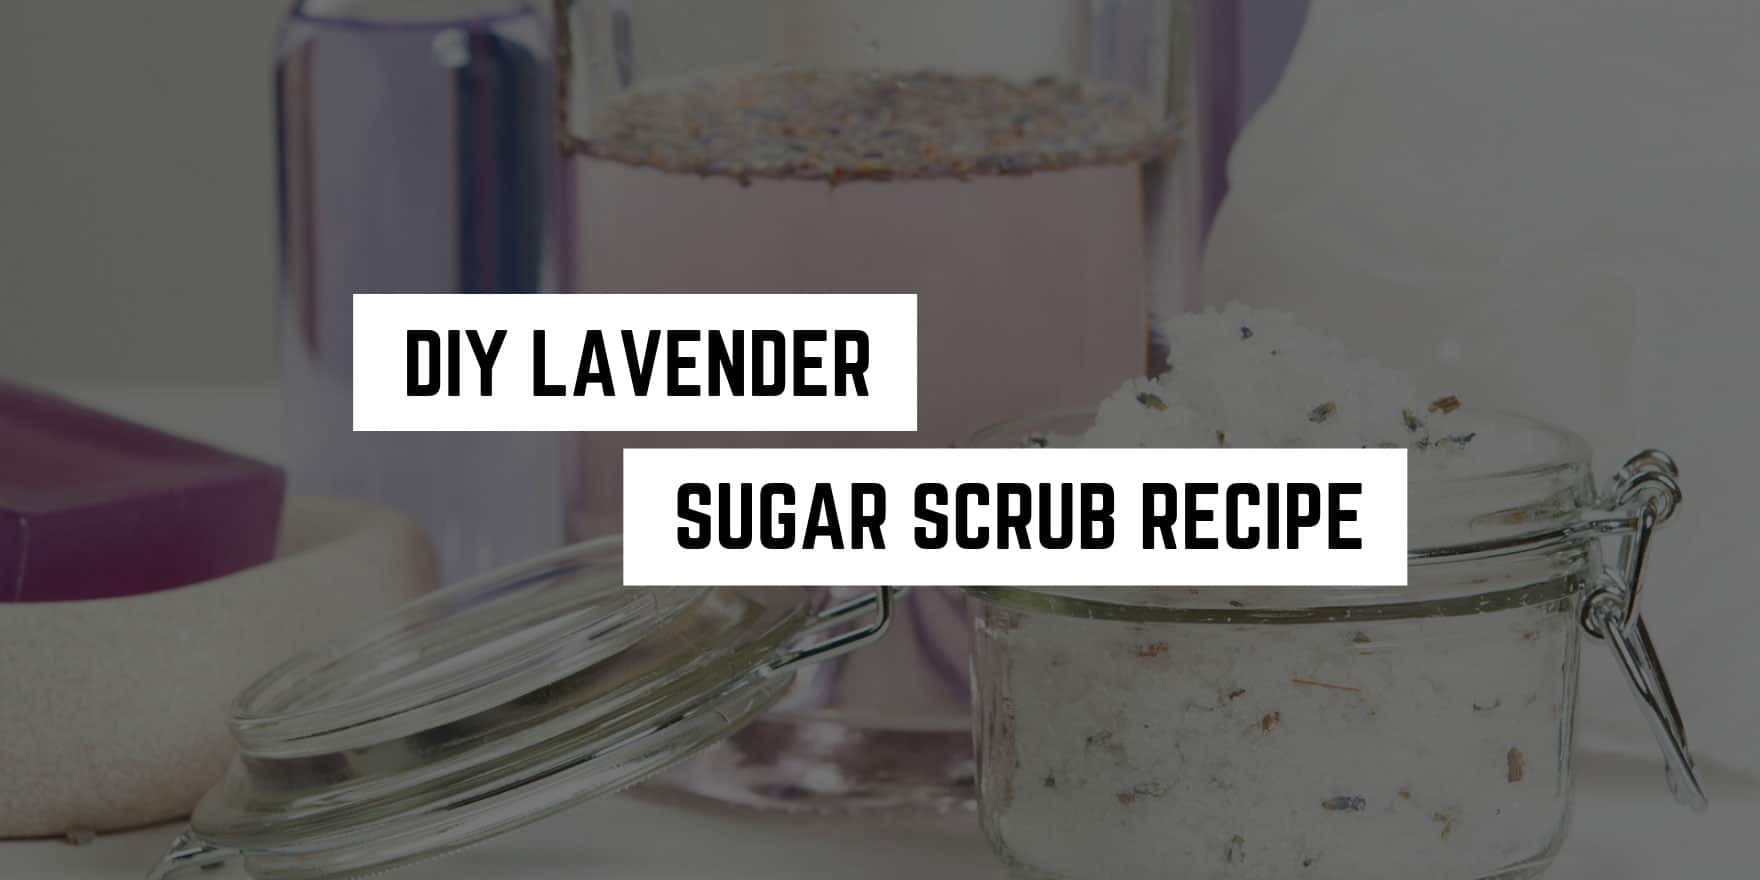 Diy lavender sugar scrub recipe: pamper your skin with witchy homemade natural exfoliant.